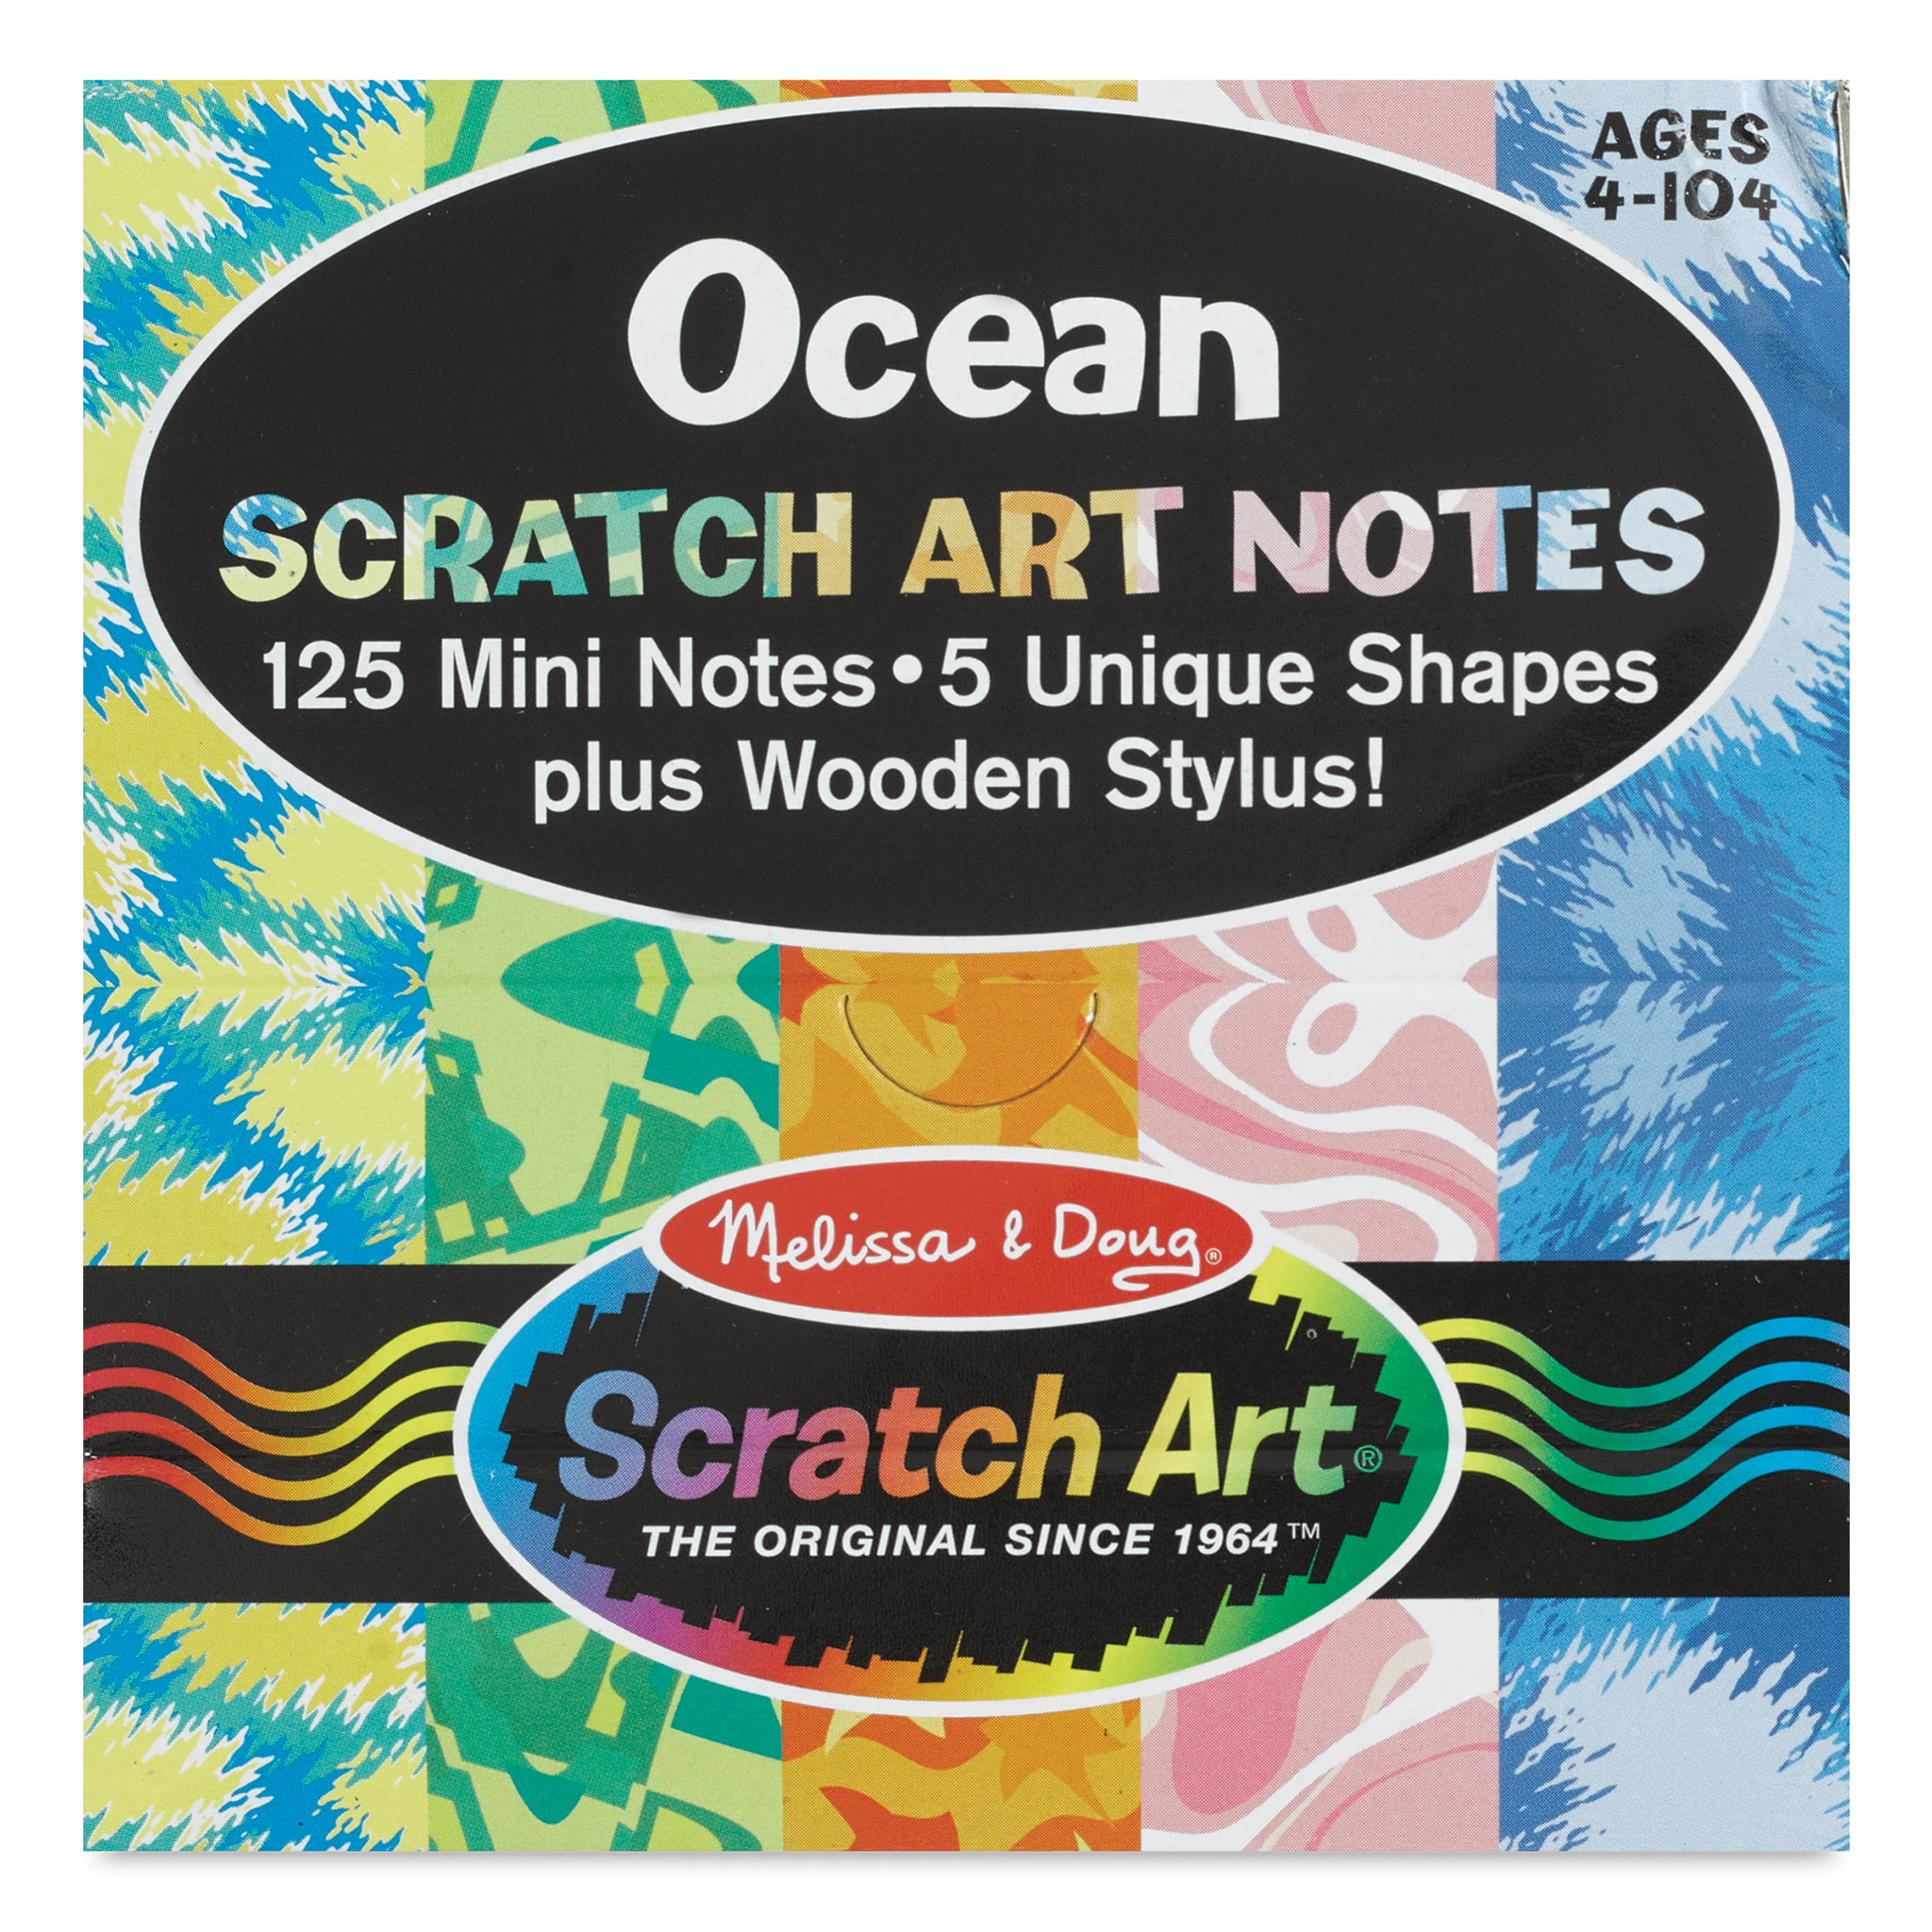 Scratch Art Holiday Mini Notes- Melissa and Doug